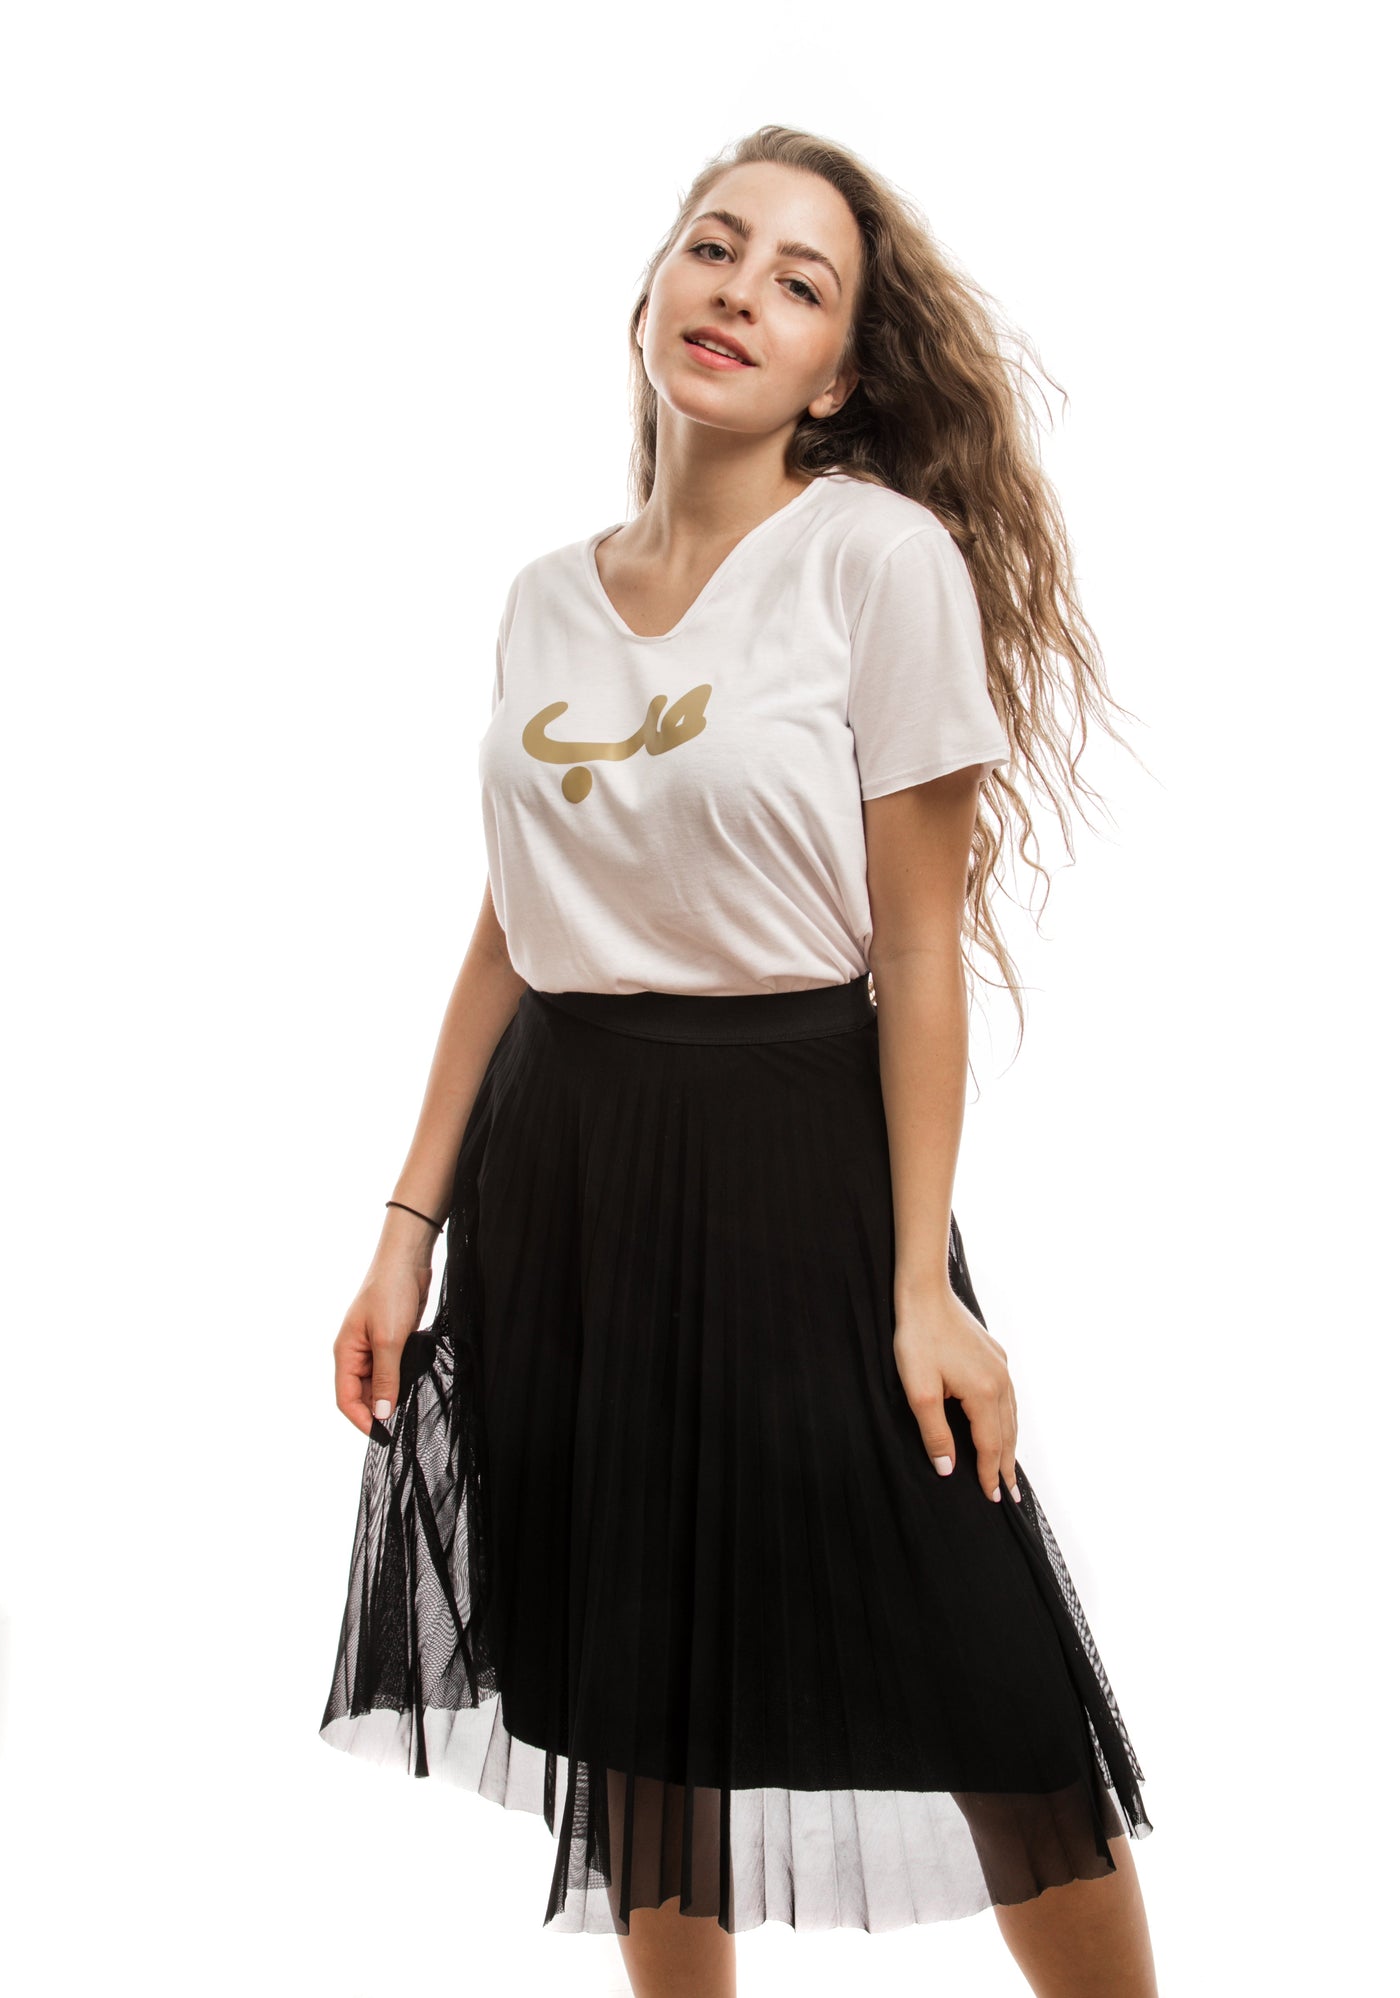 Shop The Latest Collection Of Boshies Gold Hobb White T-Shirt حب In Lebanon